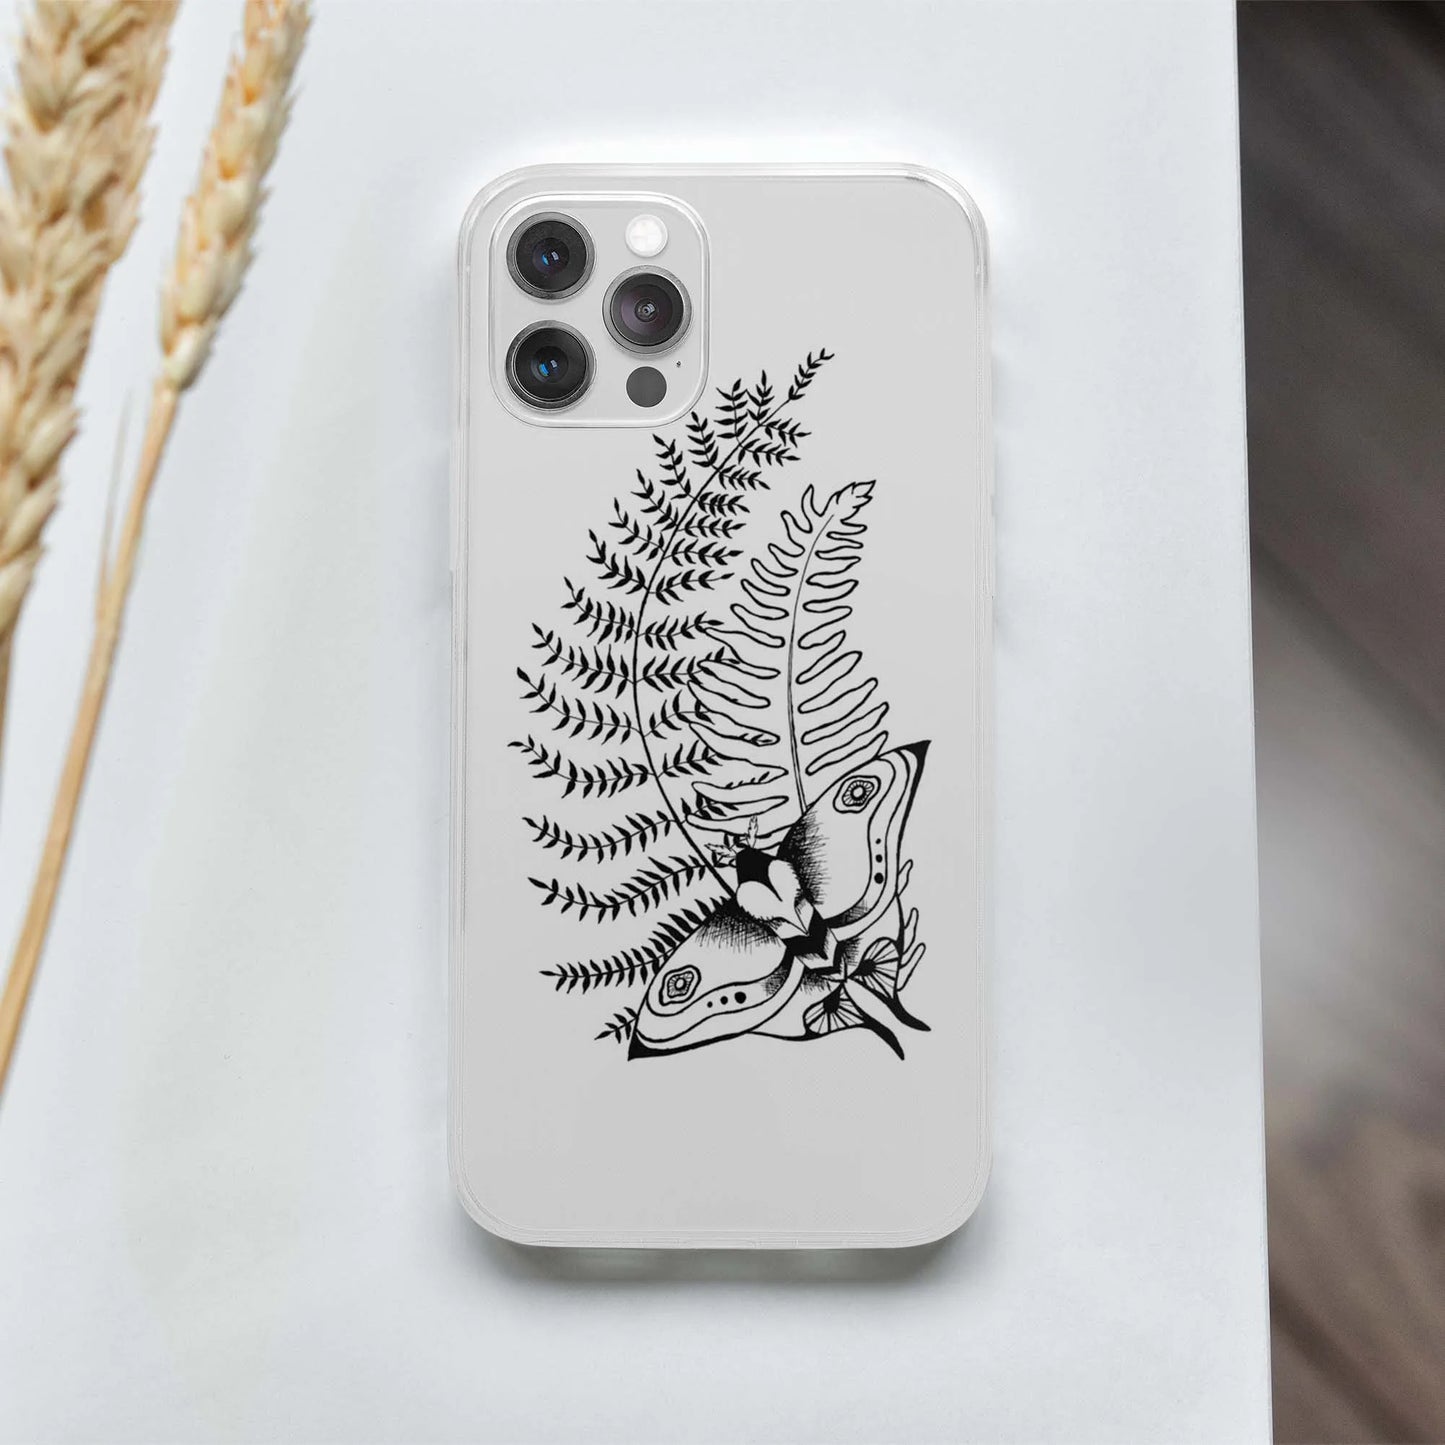 The Last Of Us Ellie Soft Phone Case for iPhone - 9 / iPhone 7 8 Available at 2Fast2See.co